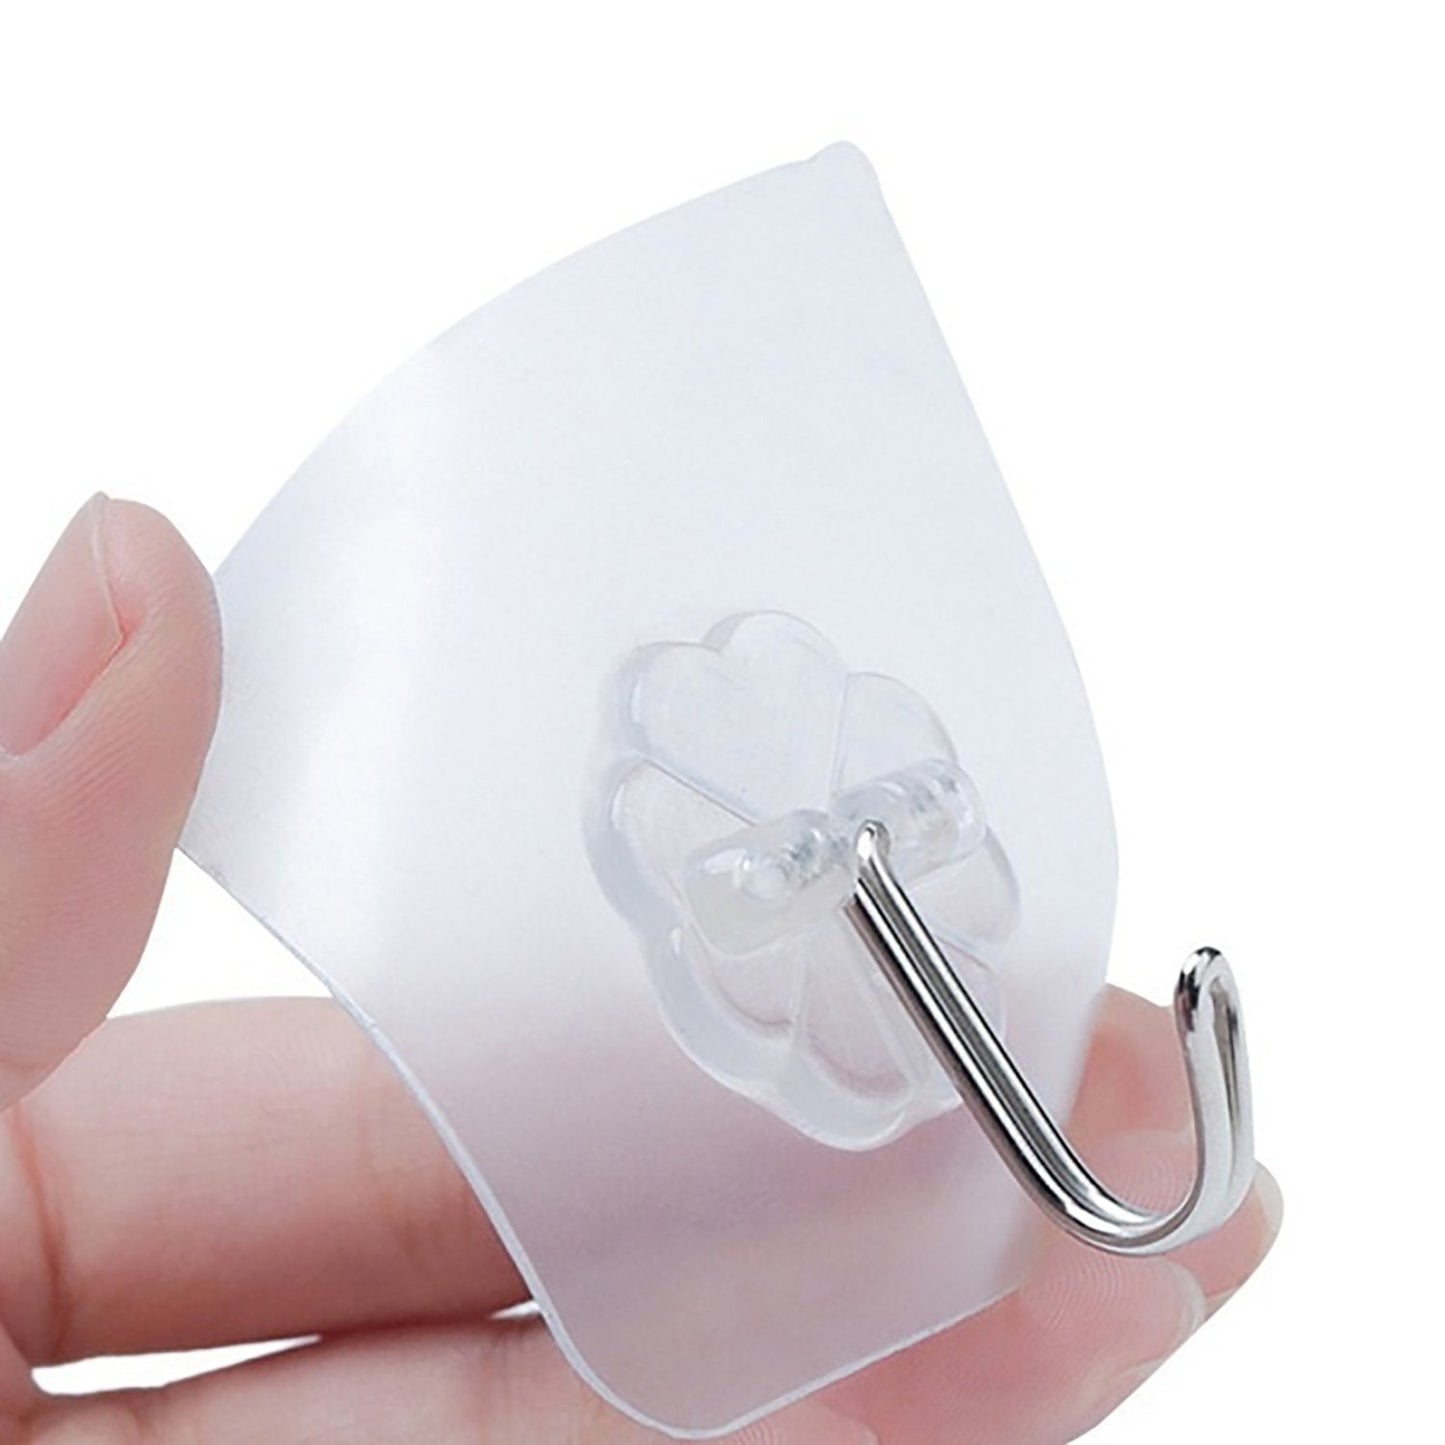 1695 MULTIPURPOSE STRONG SMALL STAINLESS STEEL ADHESIVE WALL HOOKS (1 Pc)